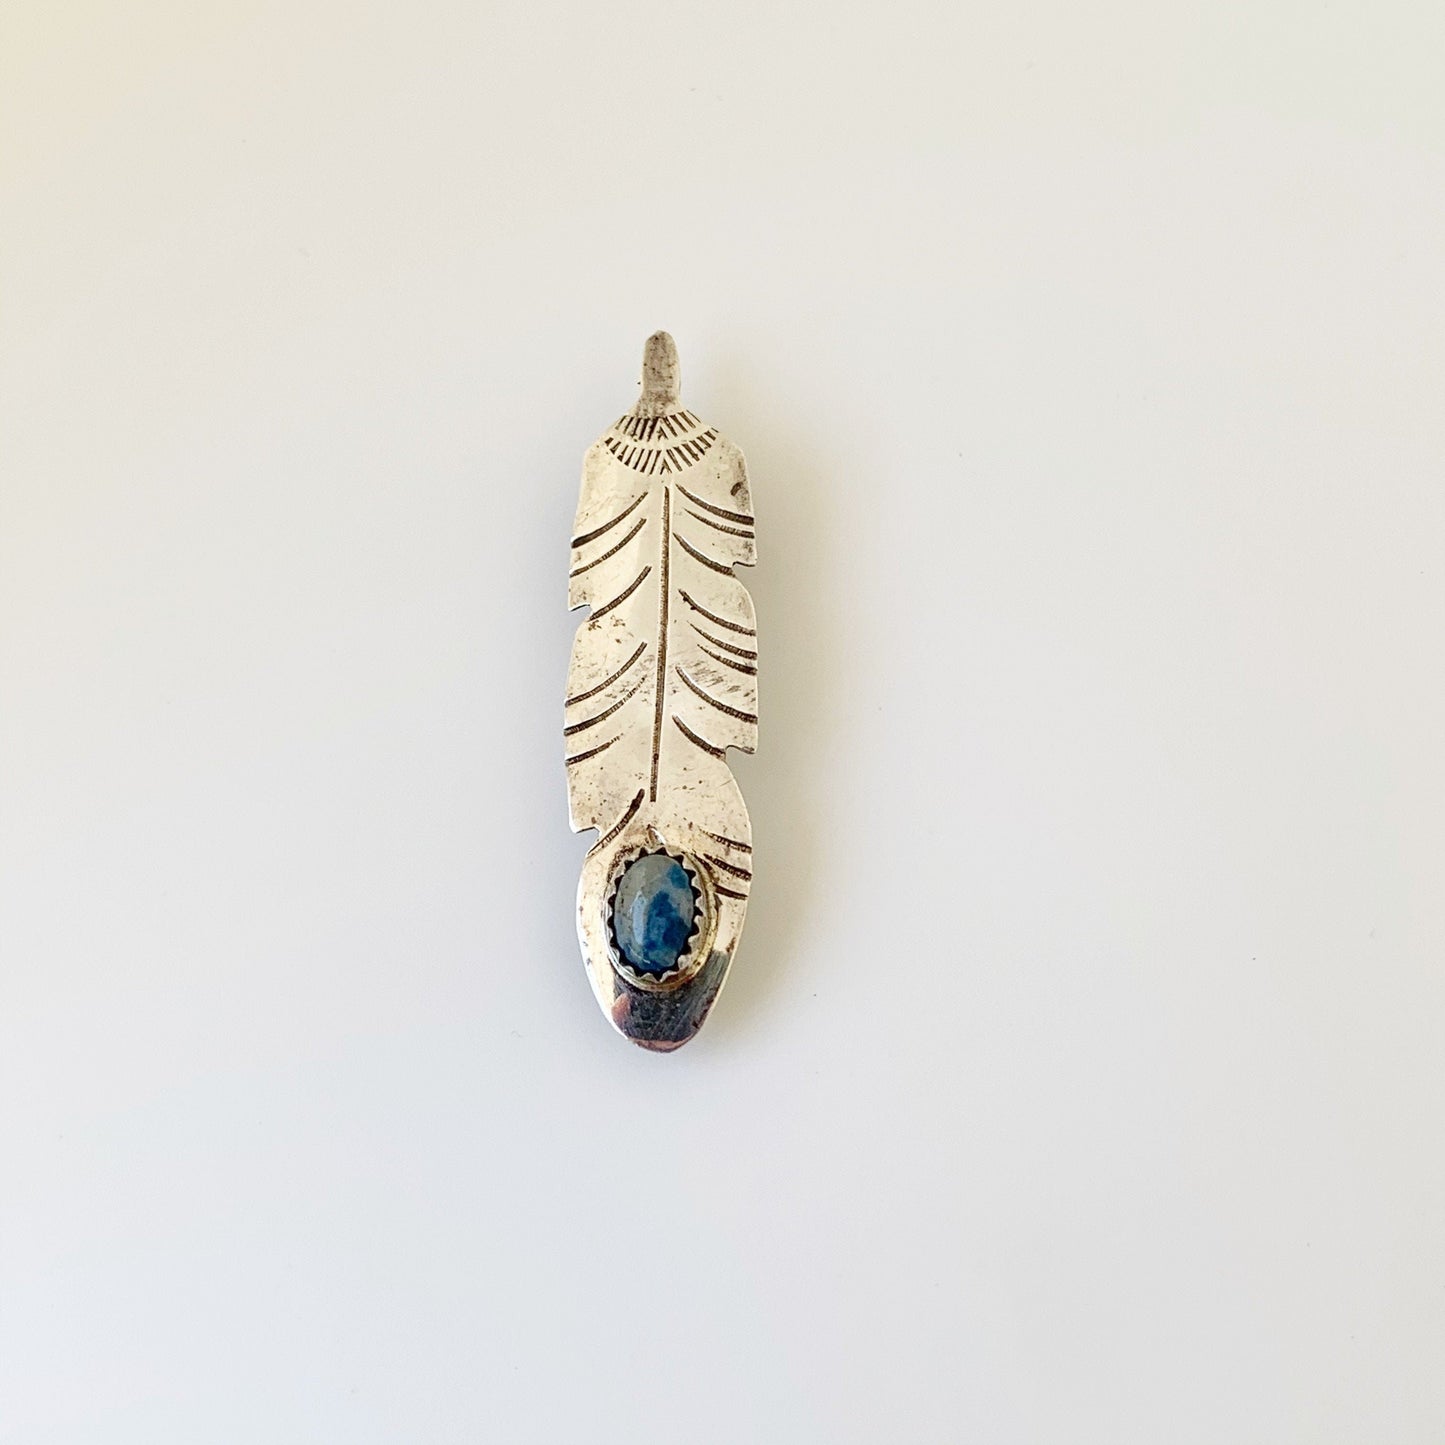 Vintage Silver Sodalite Feather Pendant | South West Feather Pendant | Pendant and Brooch Convertible Jewelry